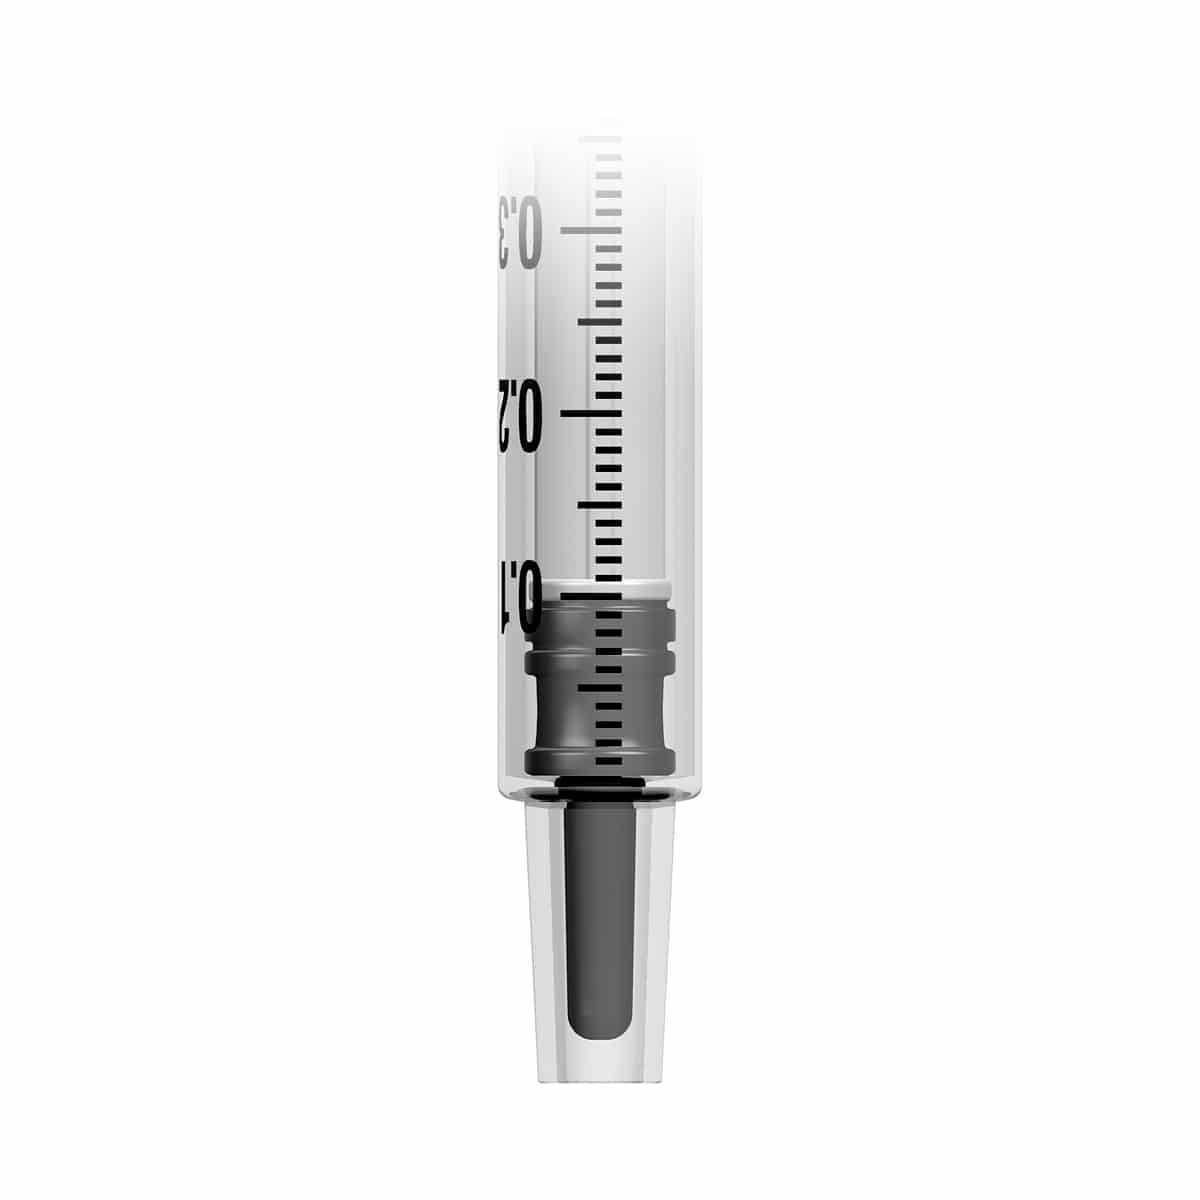 1ml Reduced Dead Space Syringes